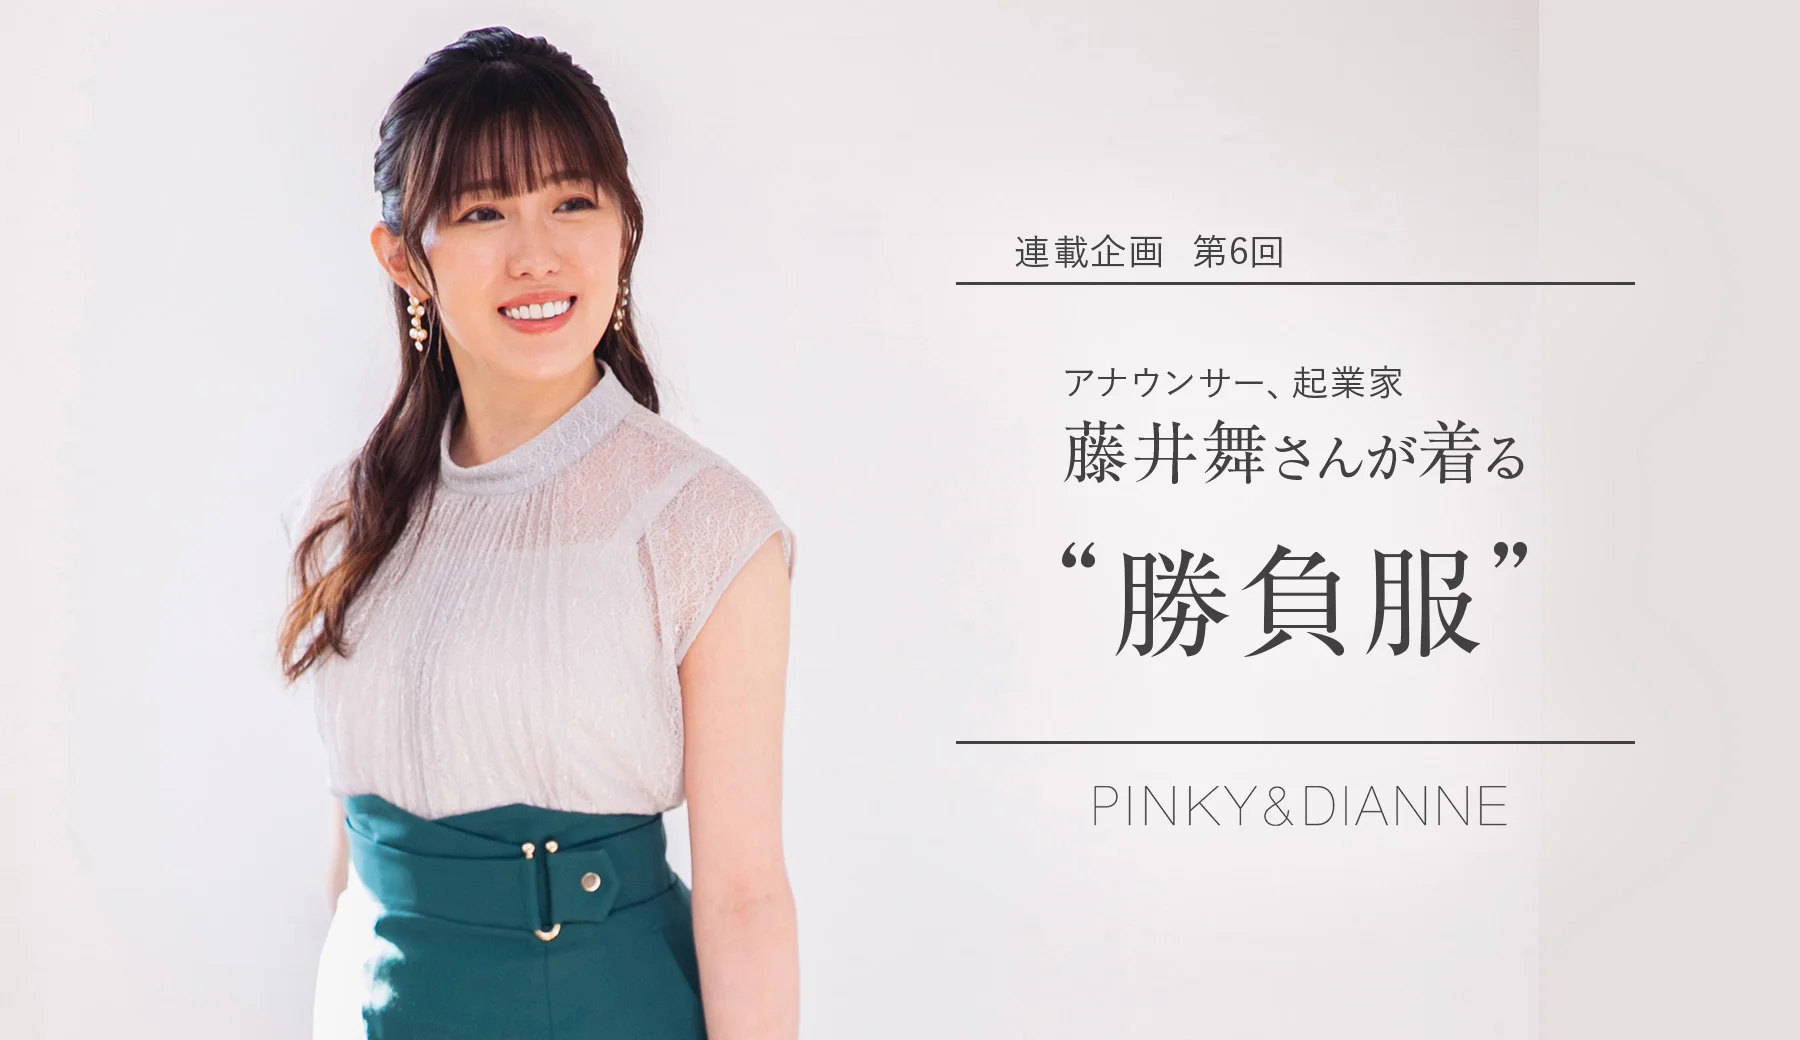 PINKY & DIANNE（ピンキーアンドダイアン）の公式通販サイト。PINKY